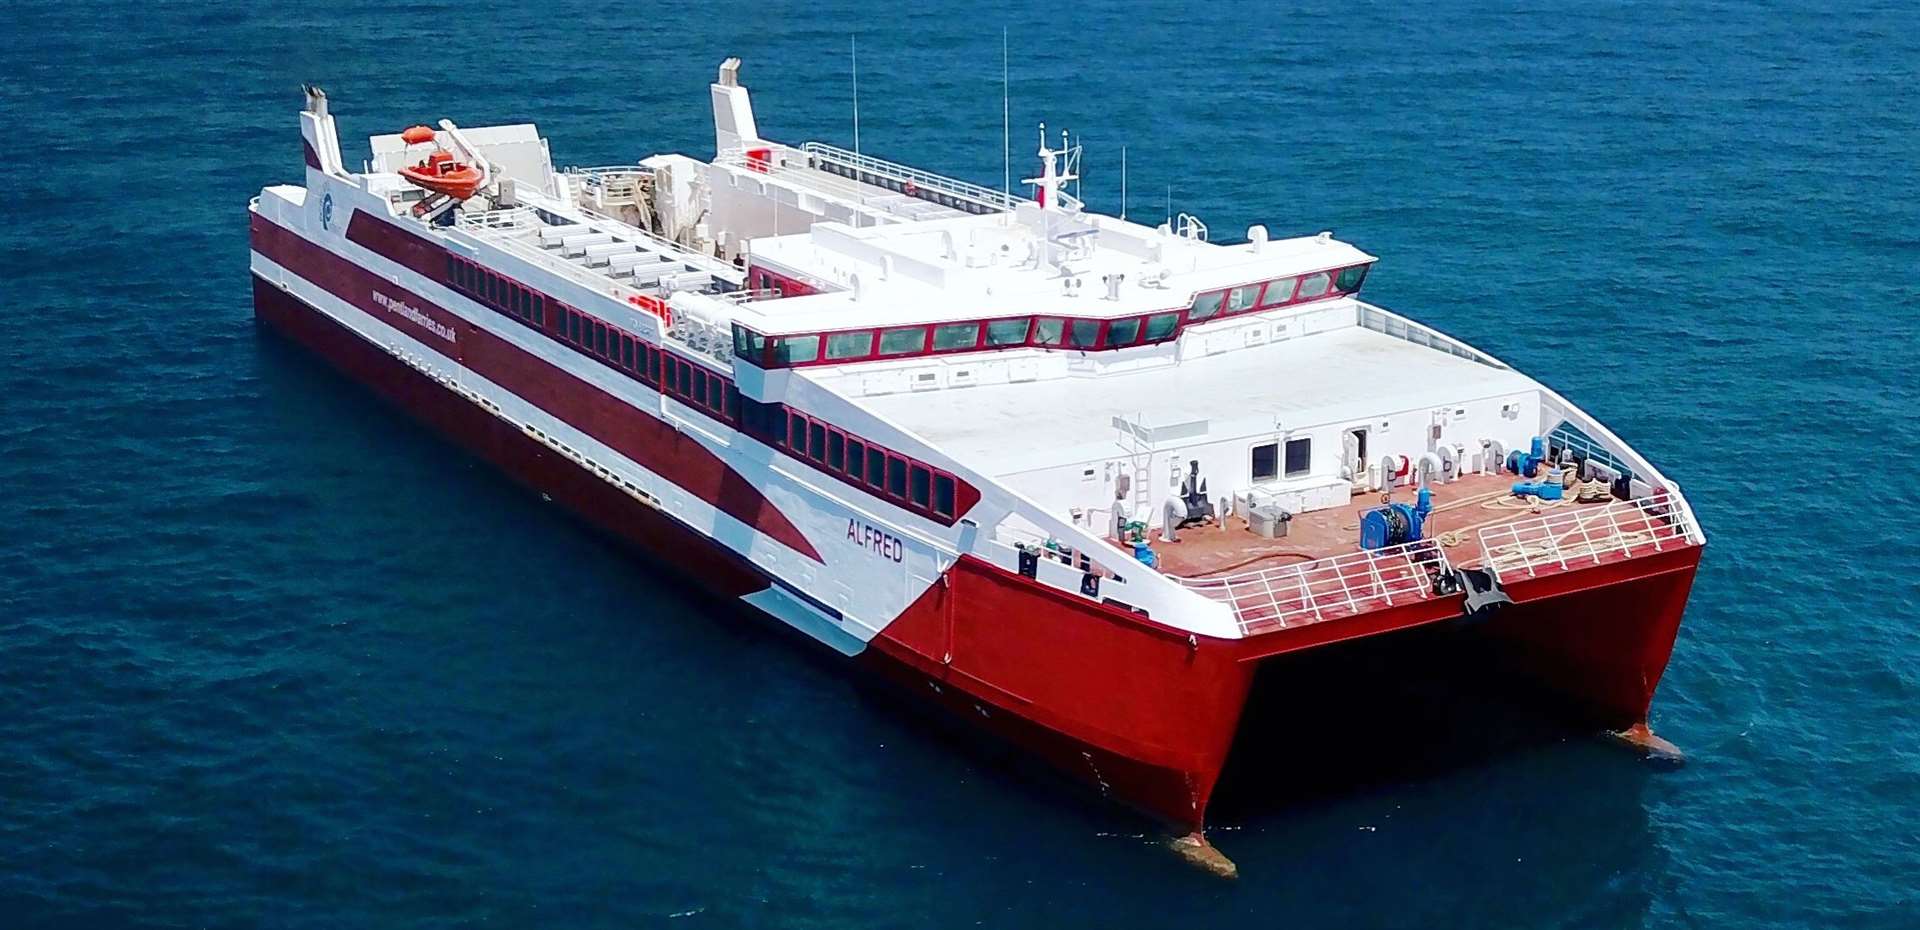 The MV Alfred is said to be the most environmentally friendly ferry of its kind in Scotland.